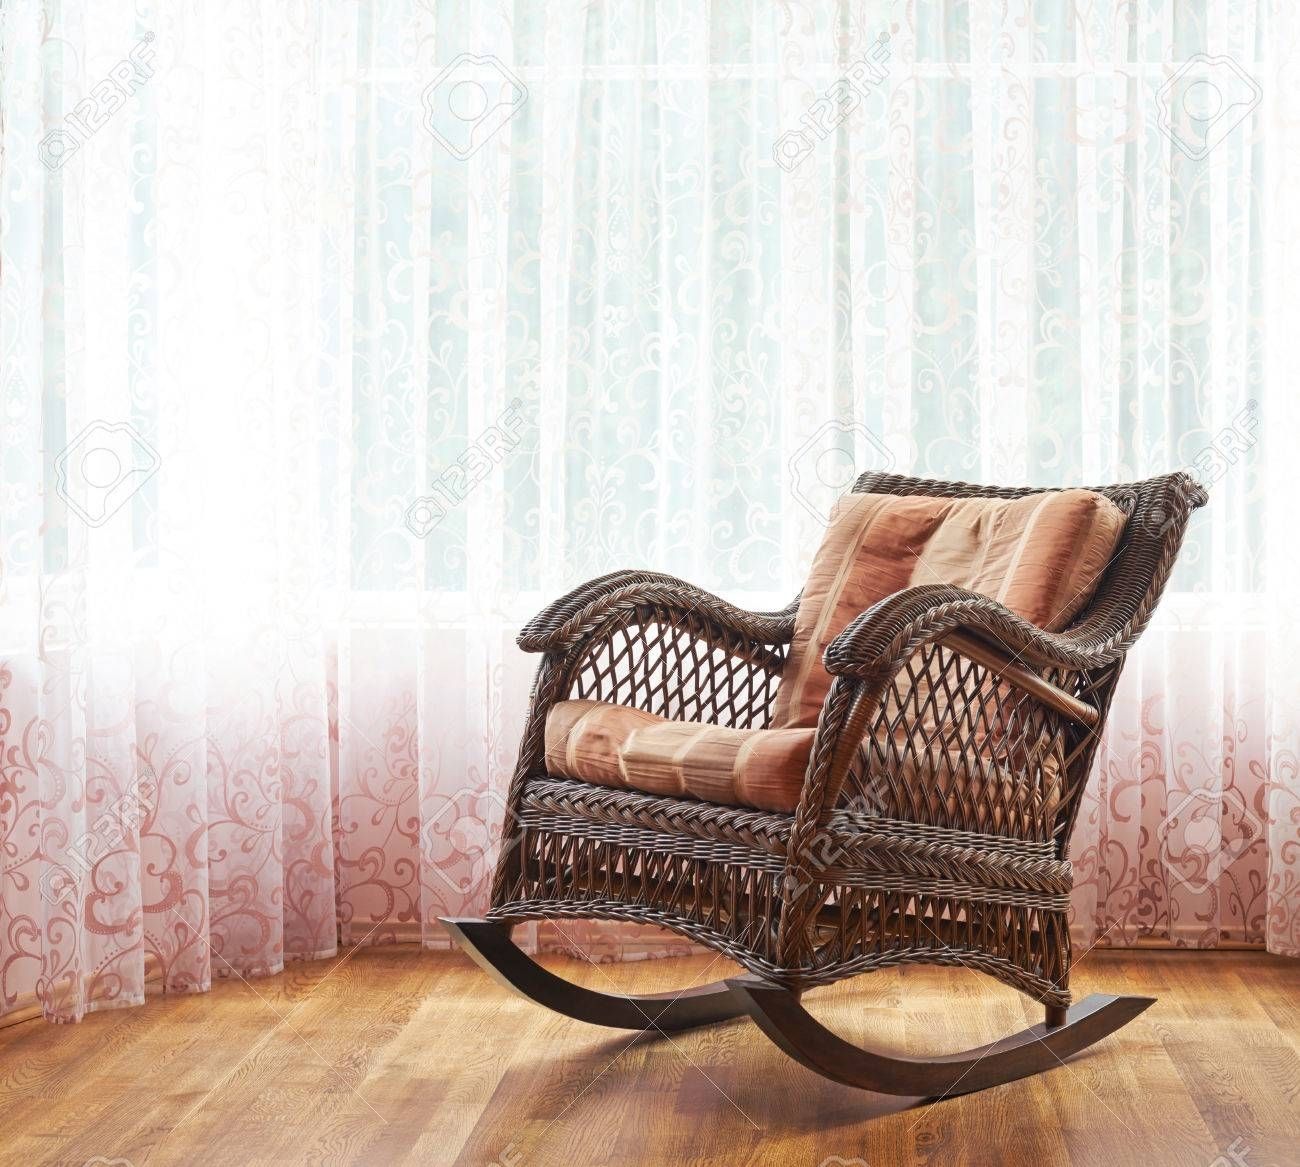 Brown Wicker Rocking Chair Against The Window's Curtains, Indoor Within Indoor Wicker Rocking Chairs (View 15 of 15)